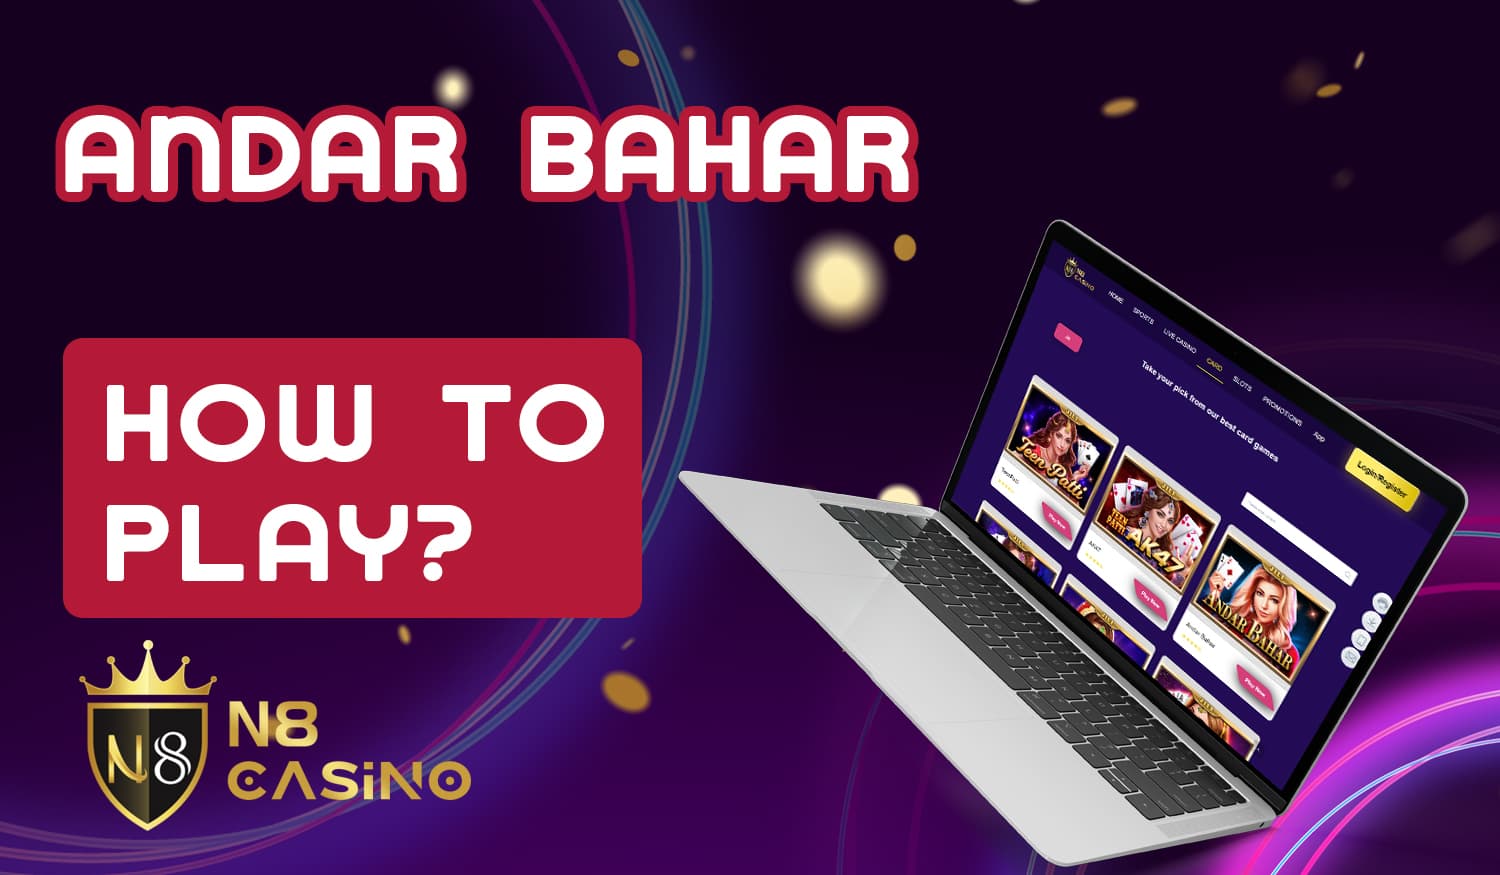 Step by step instructions on how to start playing Andar Bahar at N8 Casino